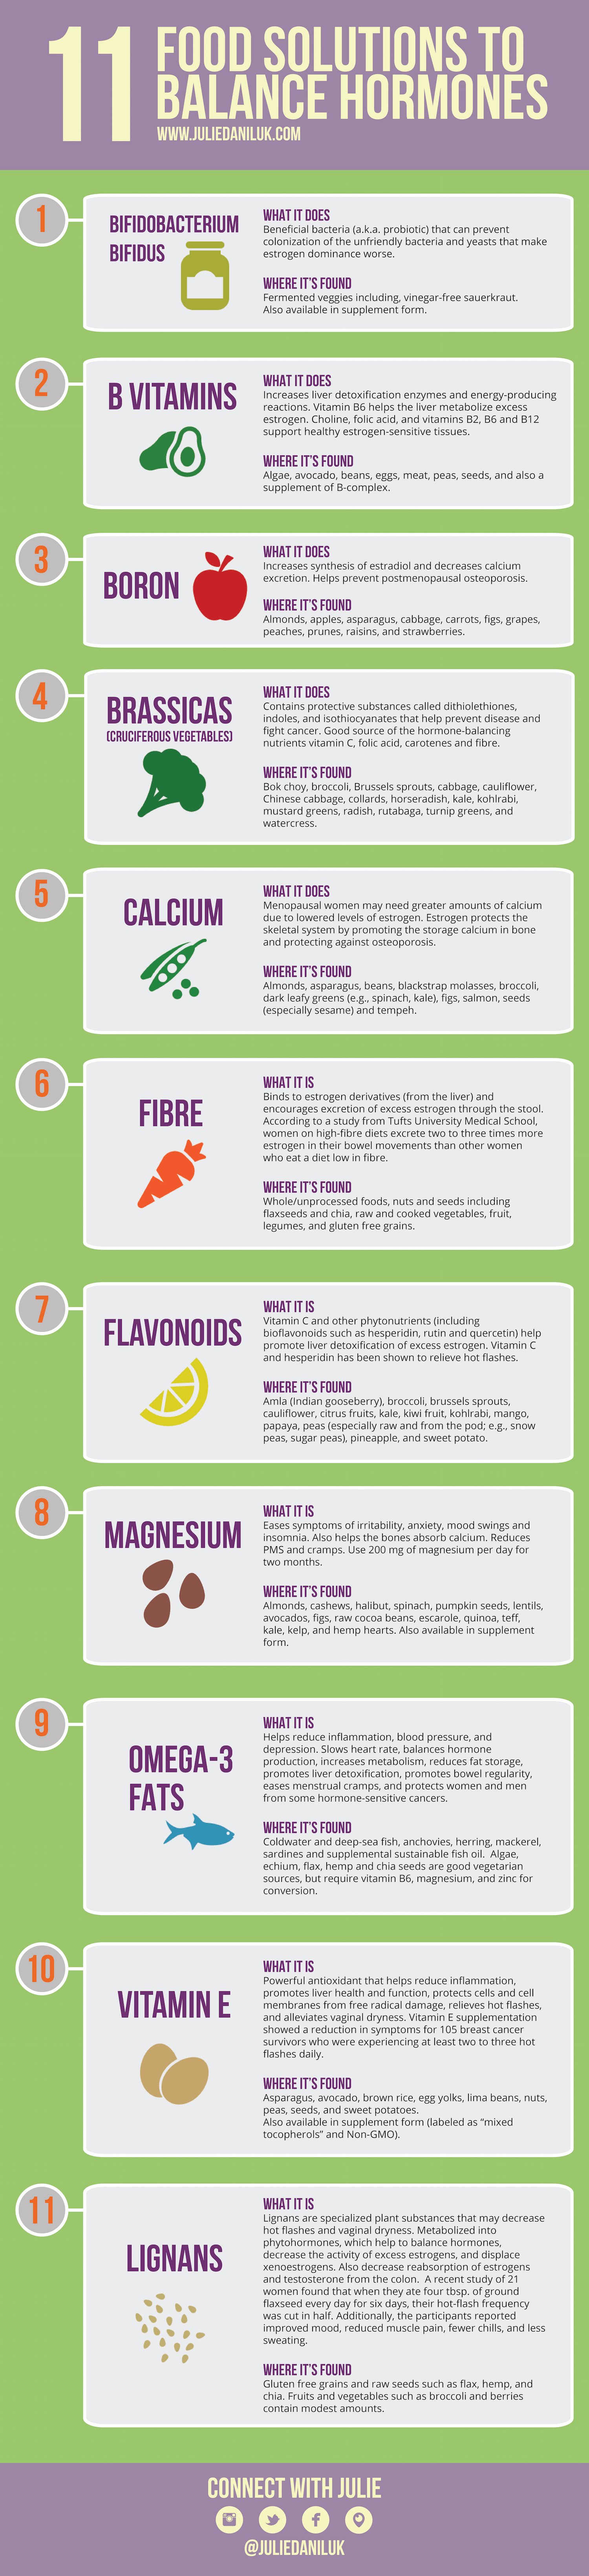 11 Powerful Foods For Balancing Your Hormones Naturally Infographic